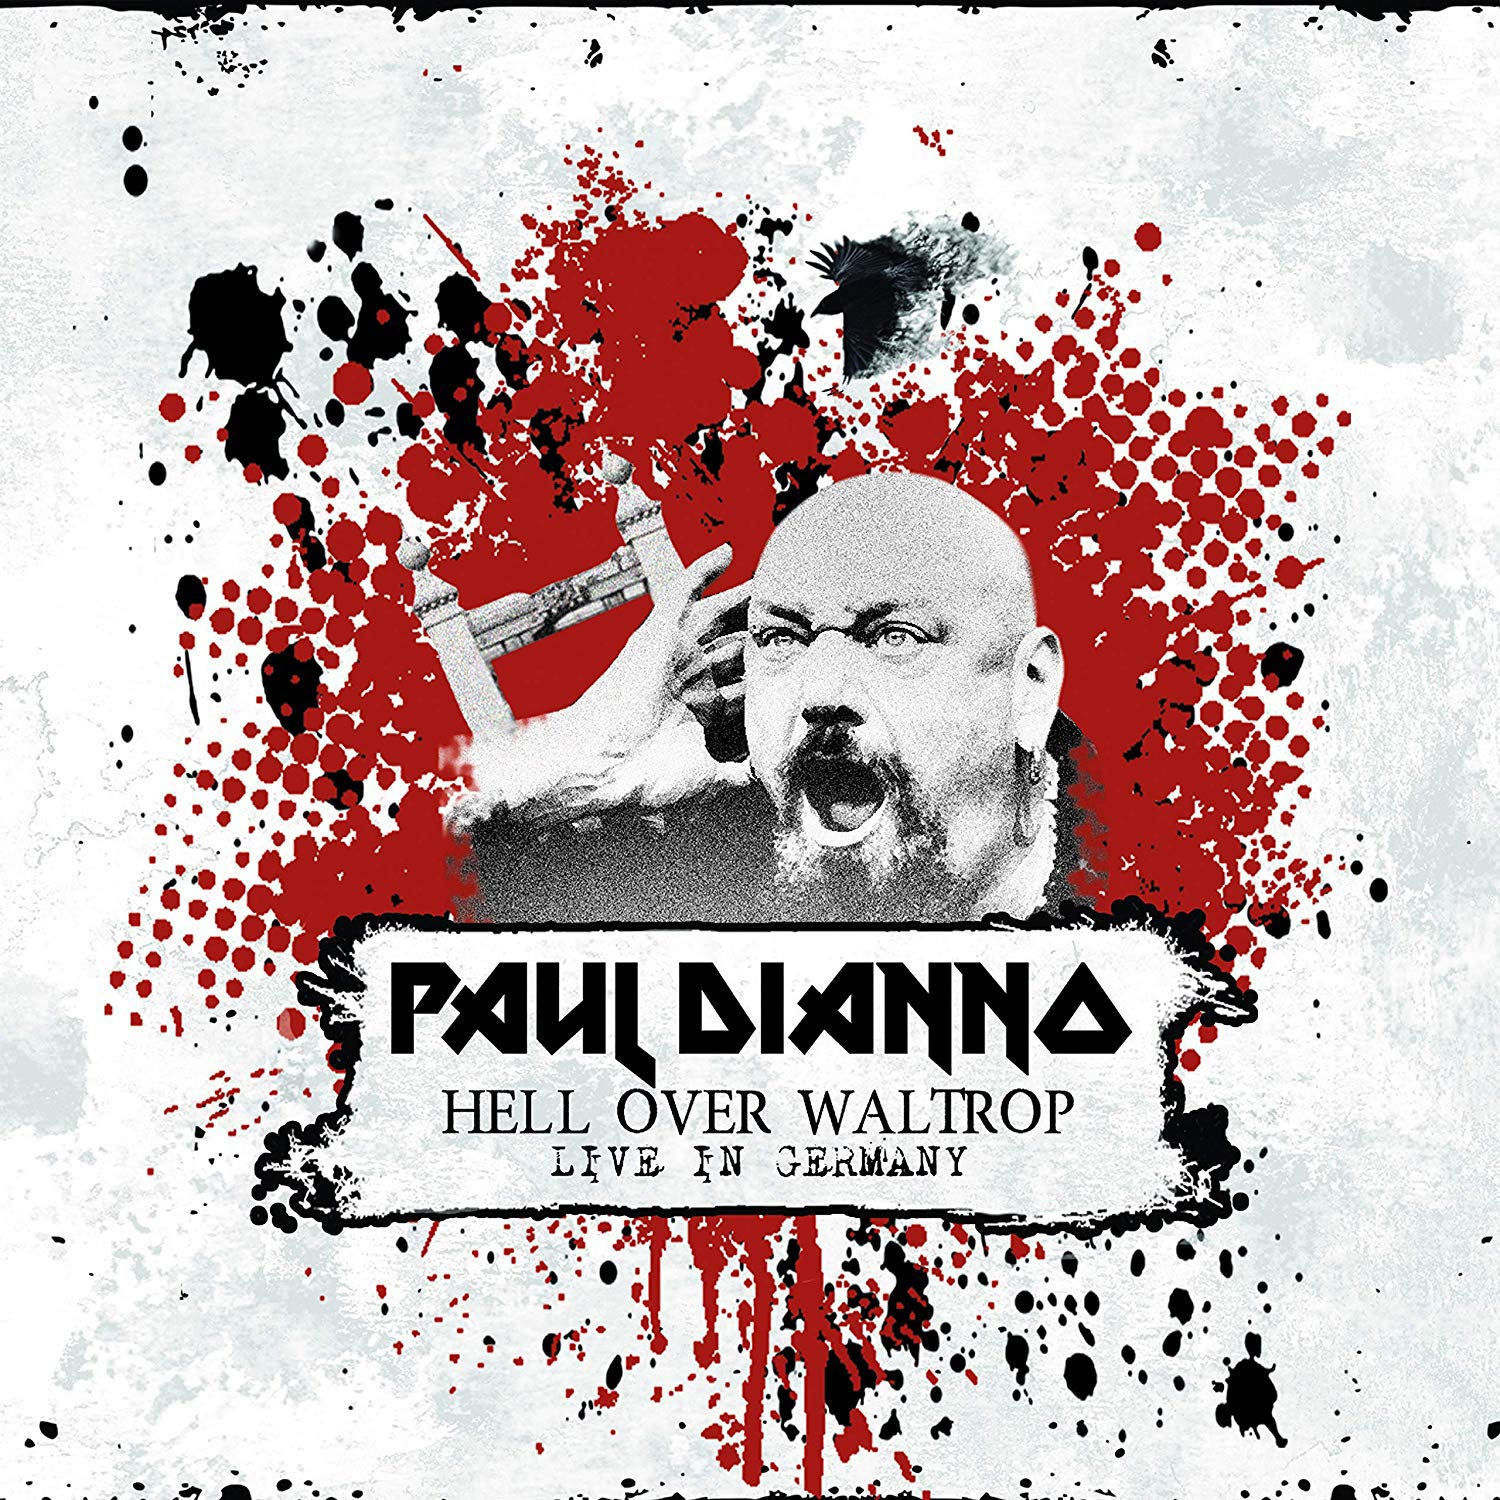 Hell Over Waltrop - Live in Germany